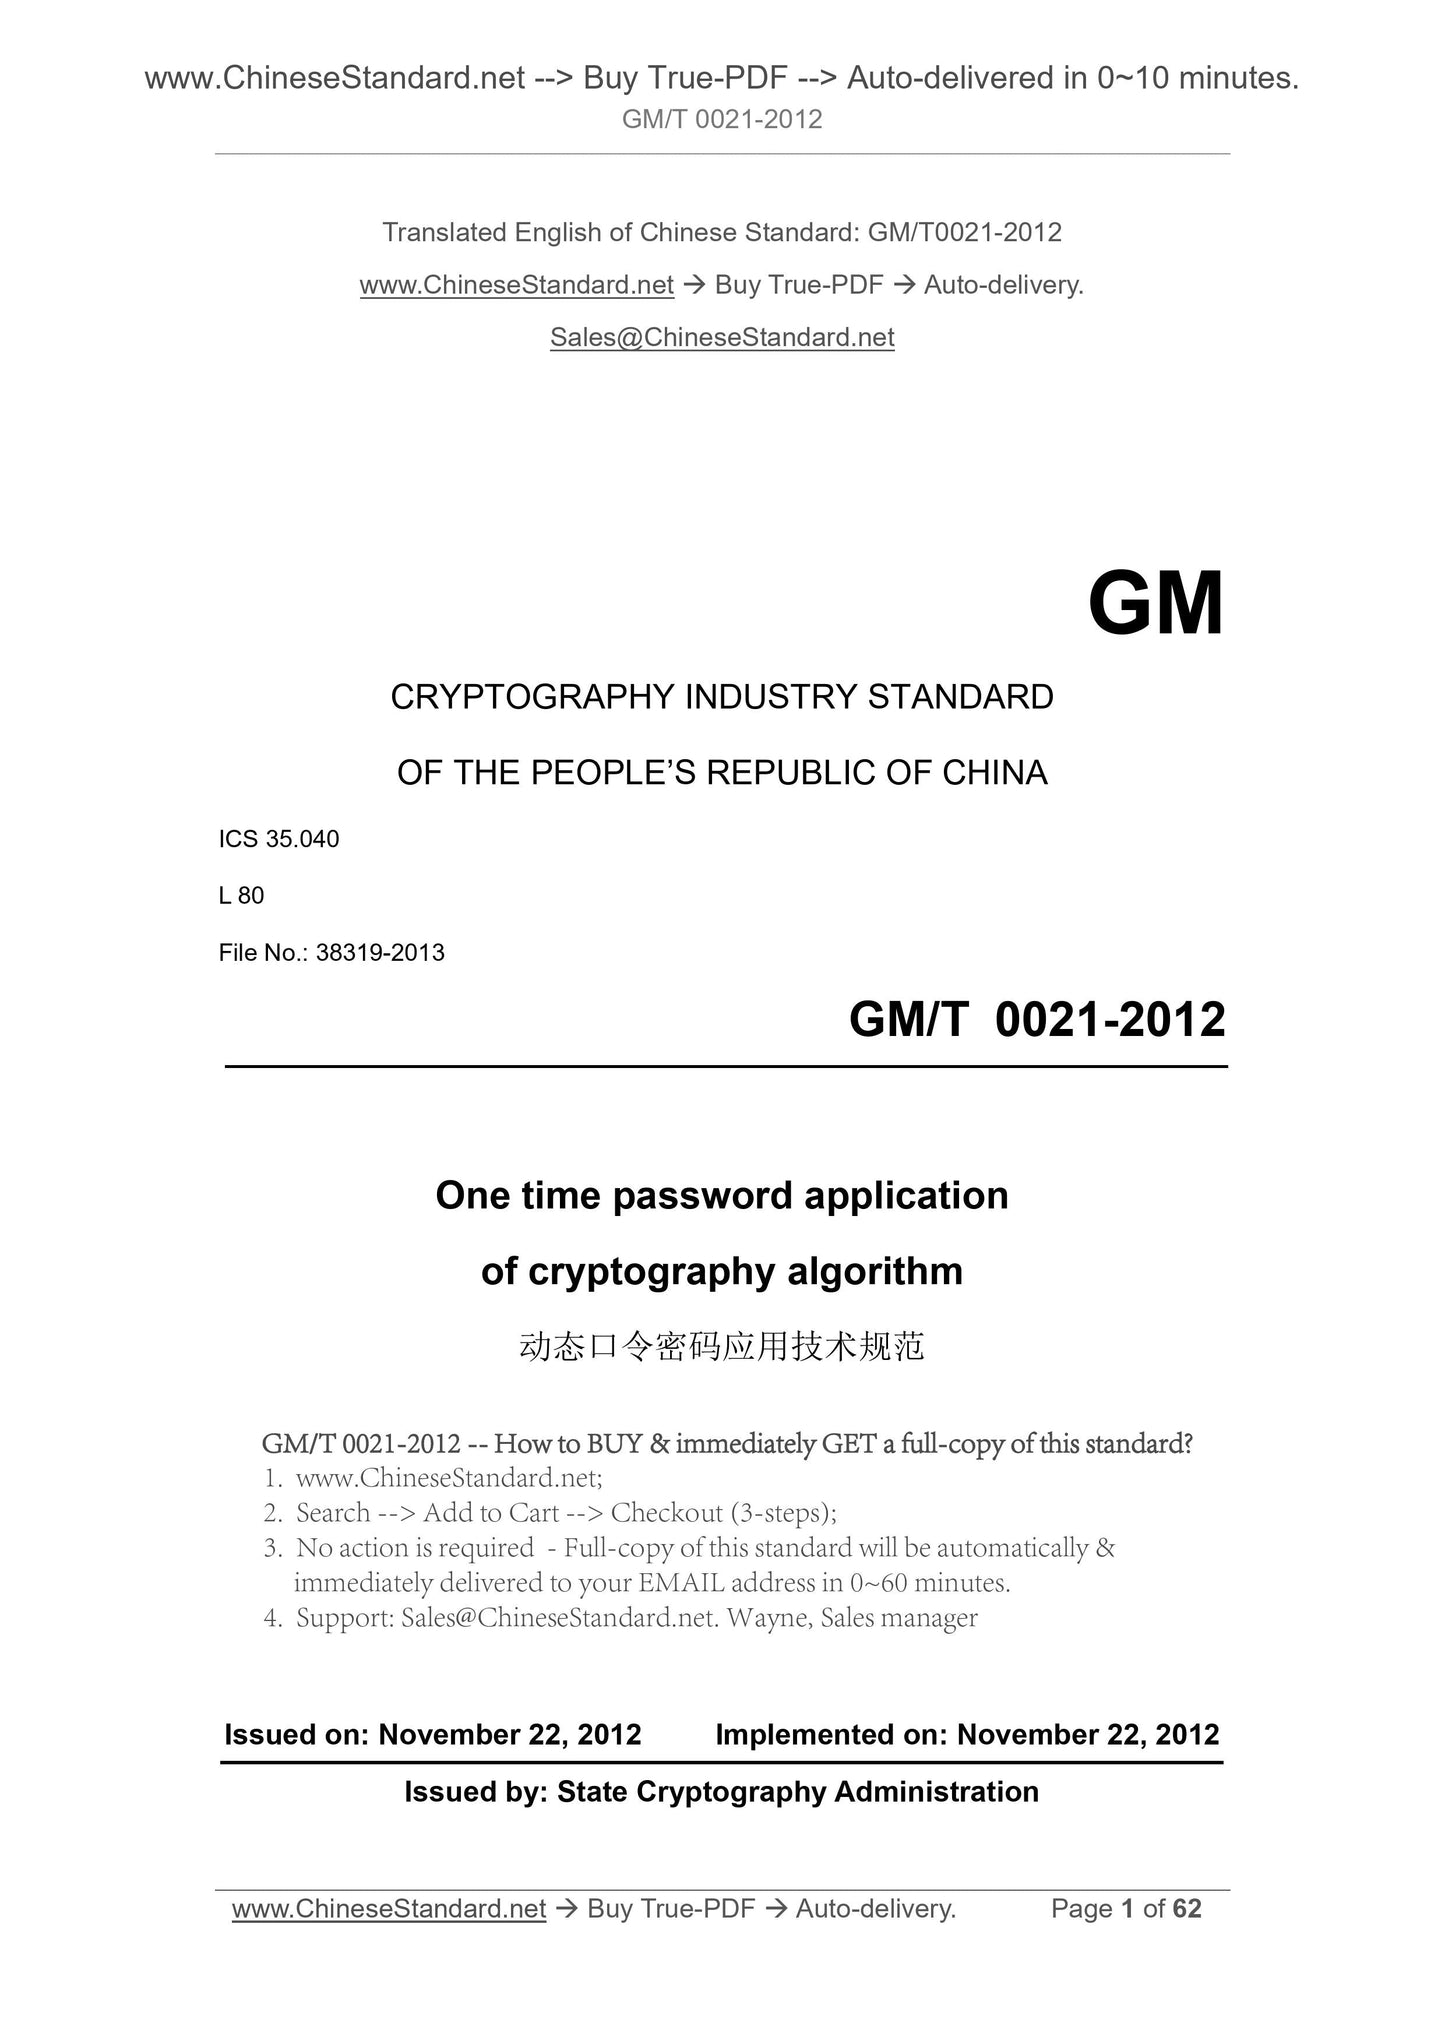 GM/T 0021-2012 Page 1